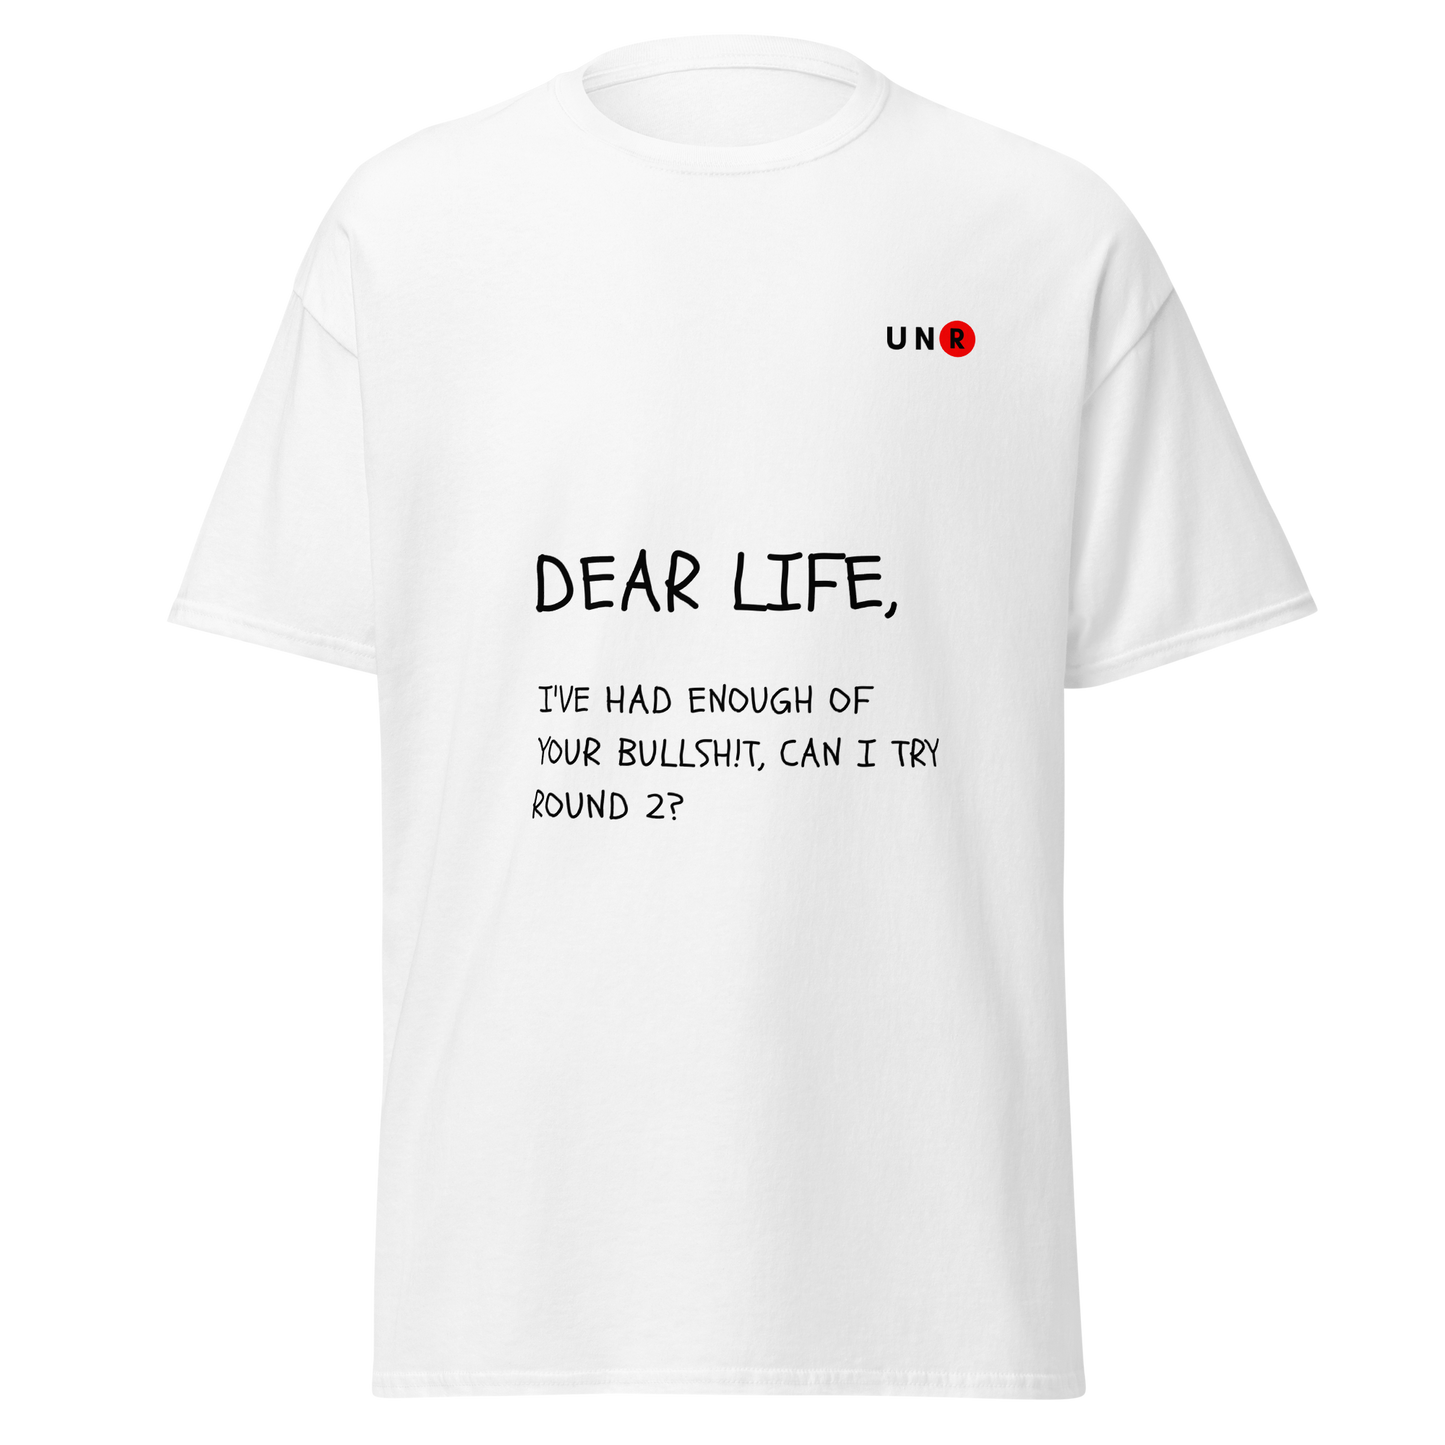 Dear Life, I've had enough of your... T-shirt